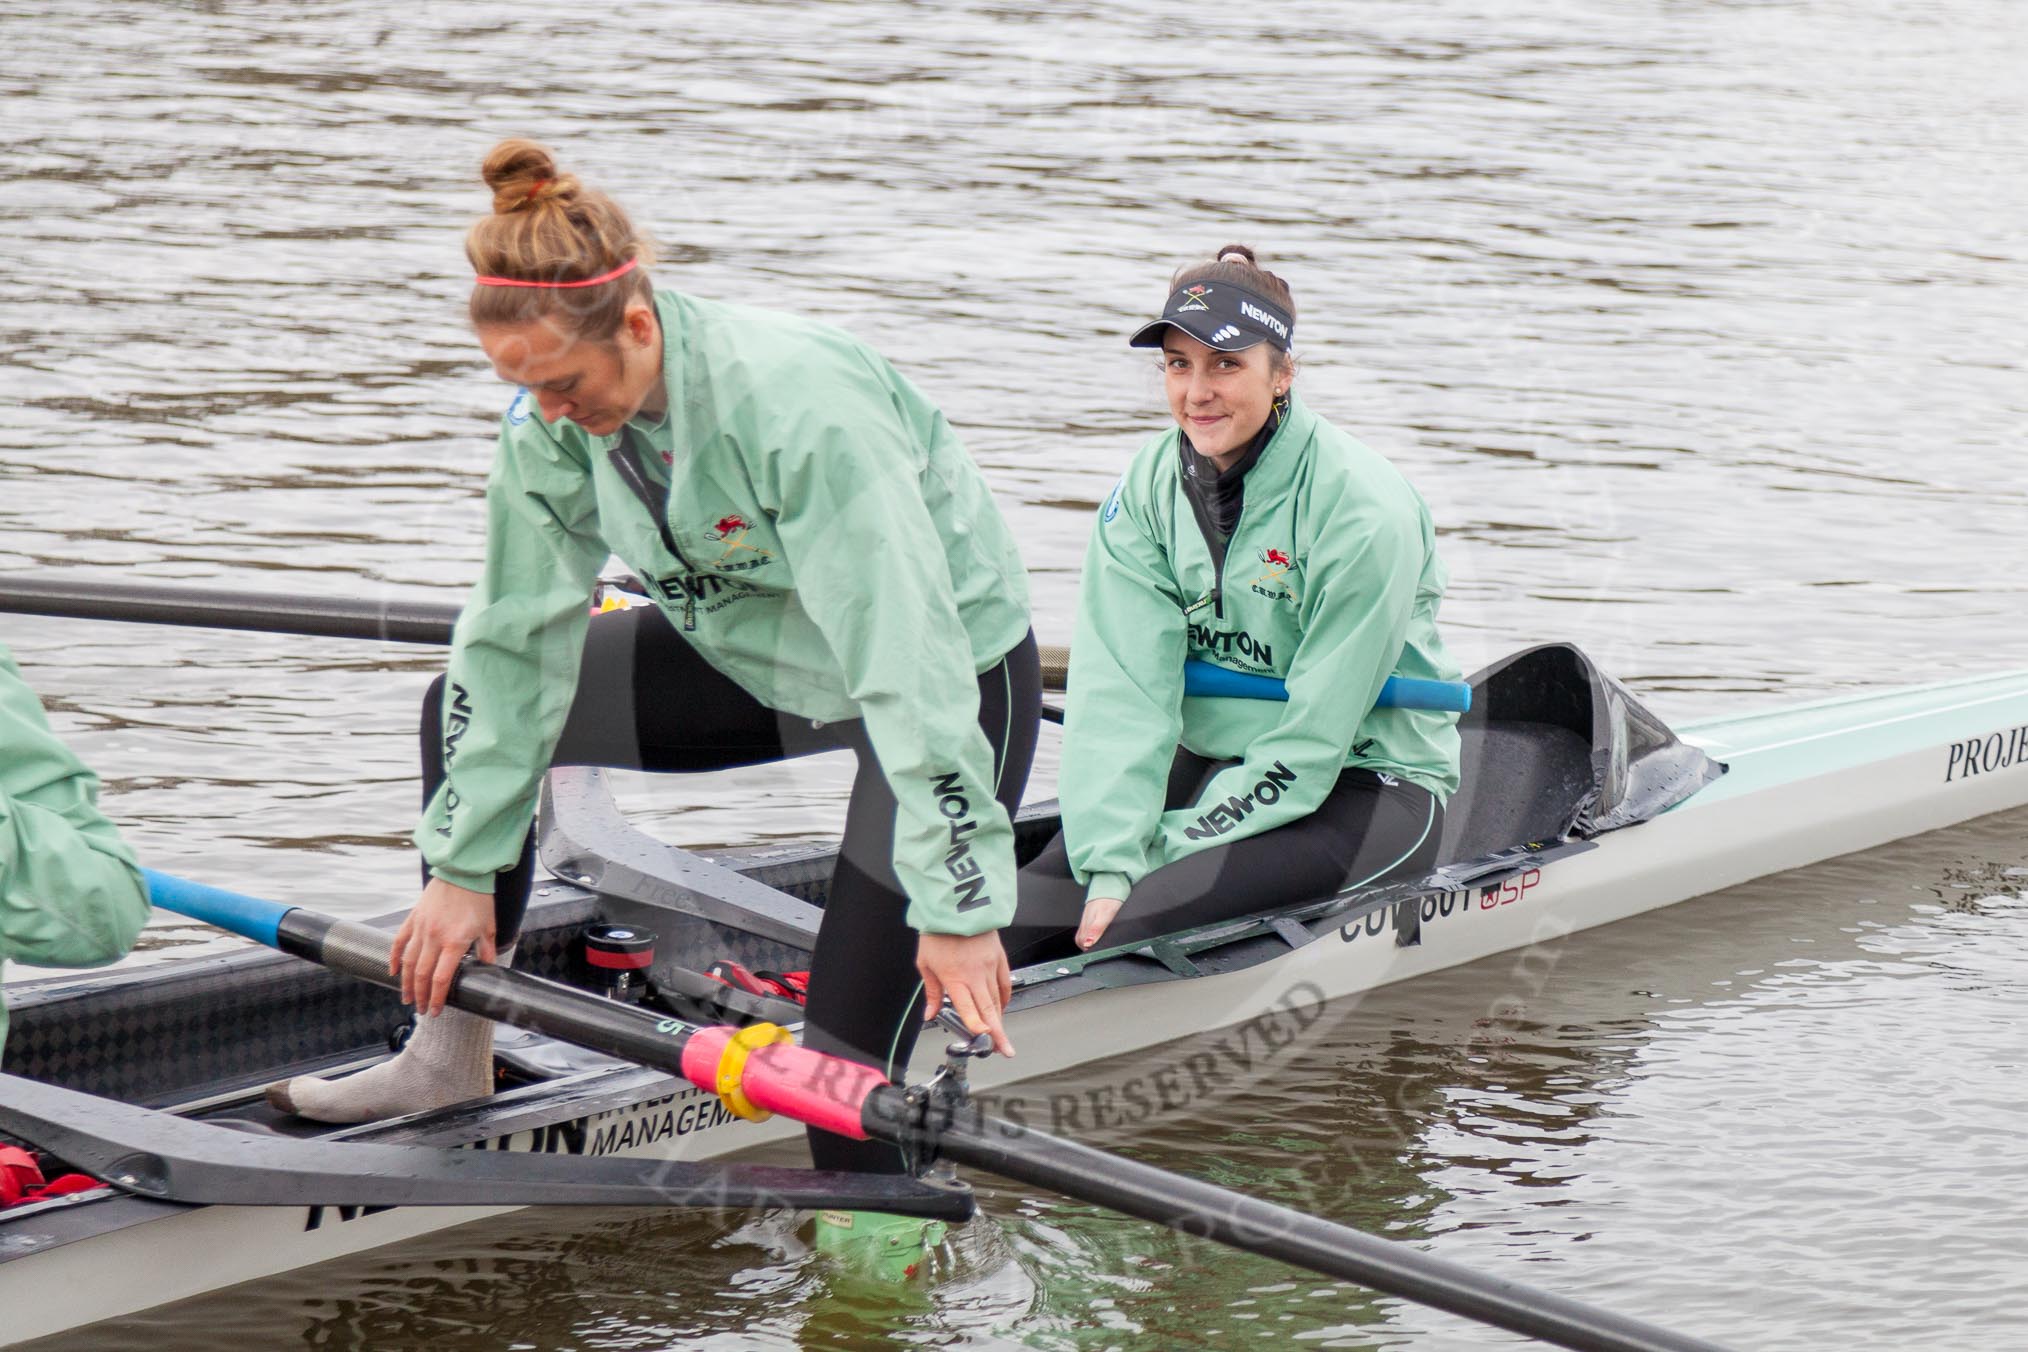 The Boat Race season 2016 - Women's Boat Race Trial Eights (CUWBC, Cambridge): Evelyn Boettcher (2) and Kate Baker (bow) getting ready in "Tideway".
River Thames between Putney Bridge and Mortlake,
London SW15,

United Kingdom,
on 10 December 2015 at 10:20, image #24